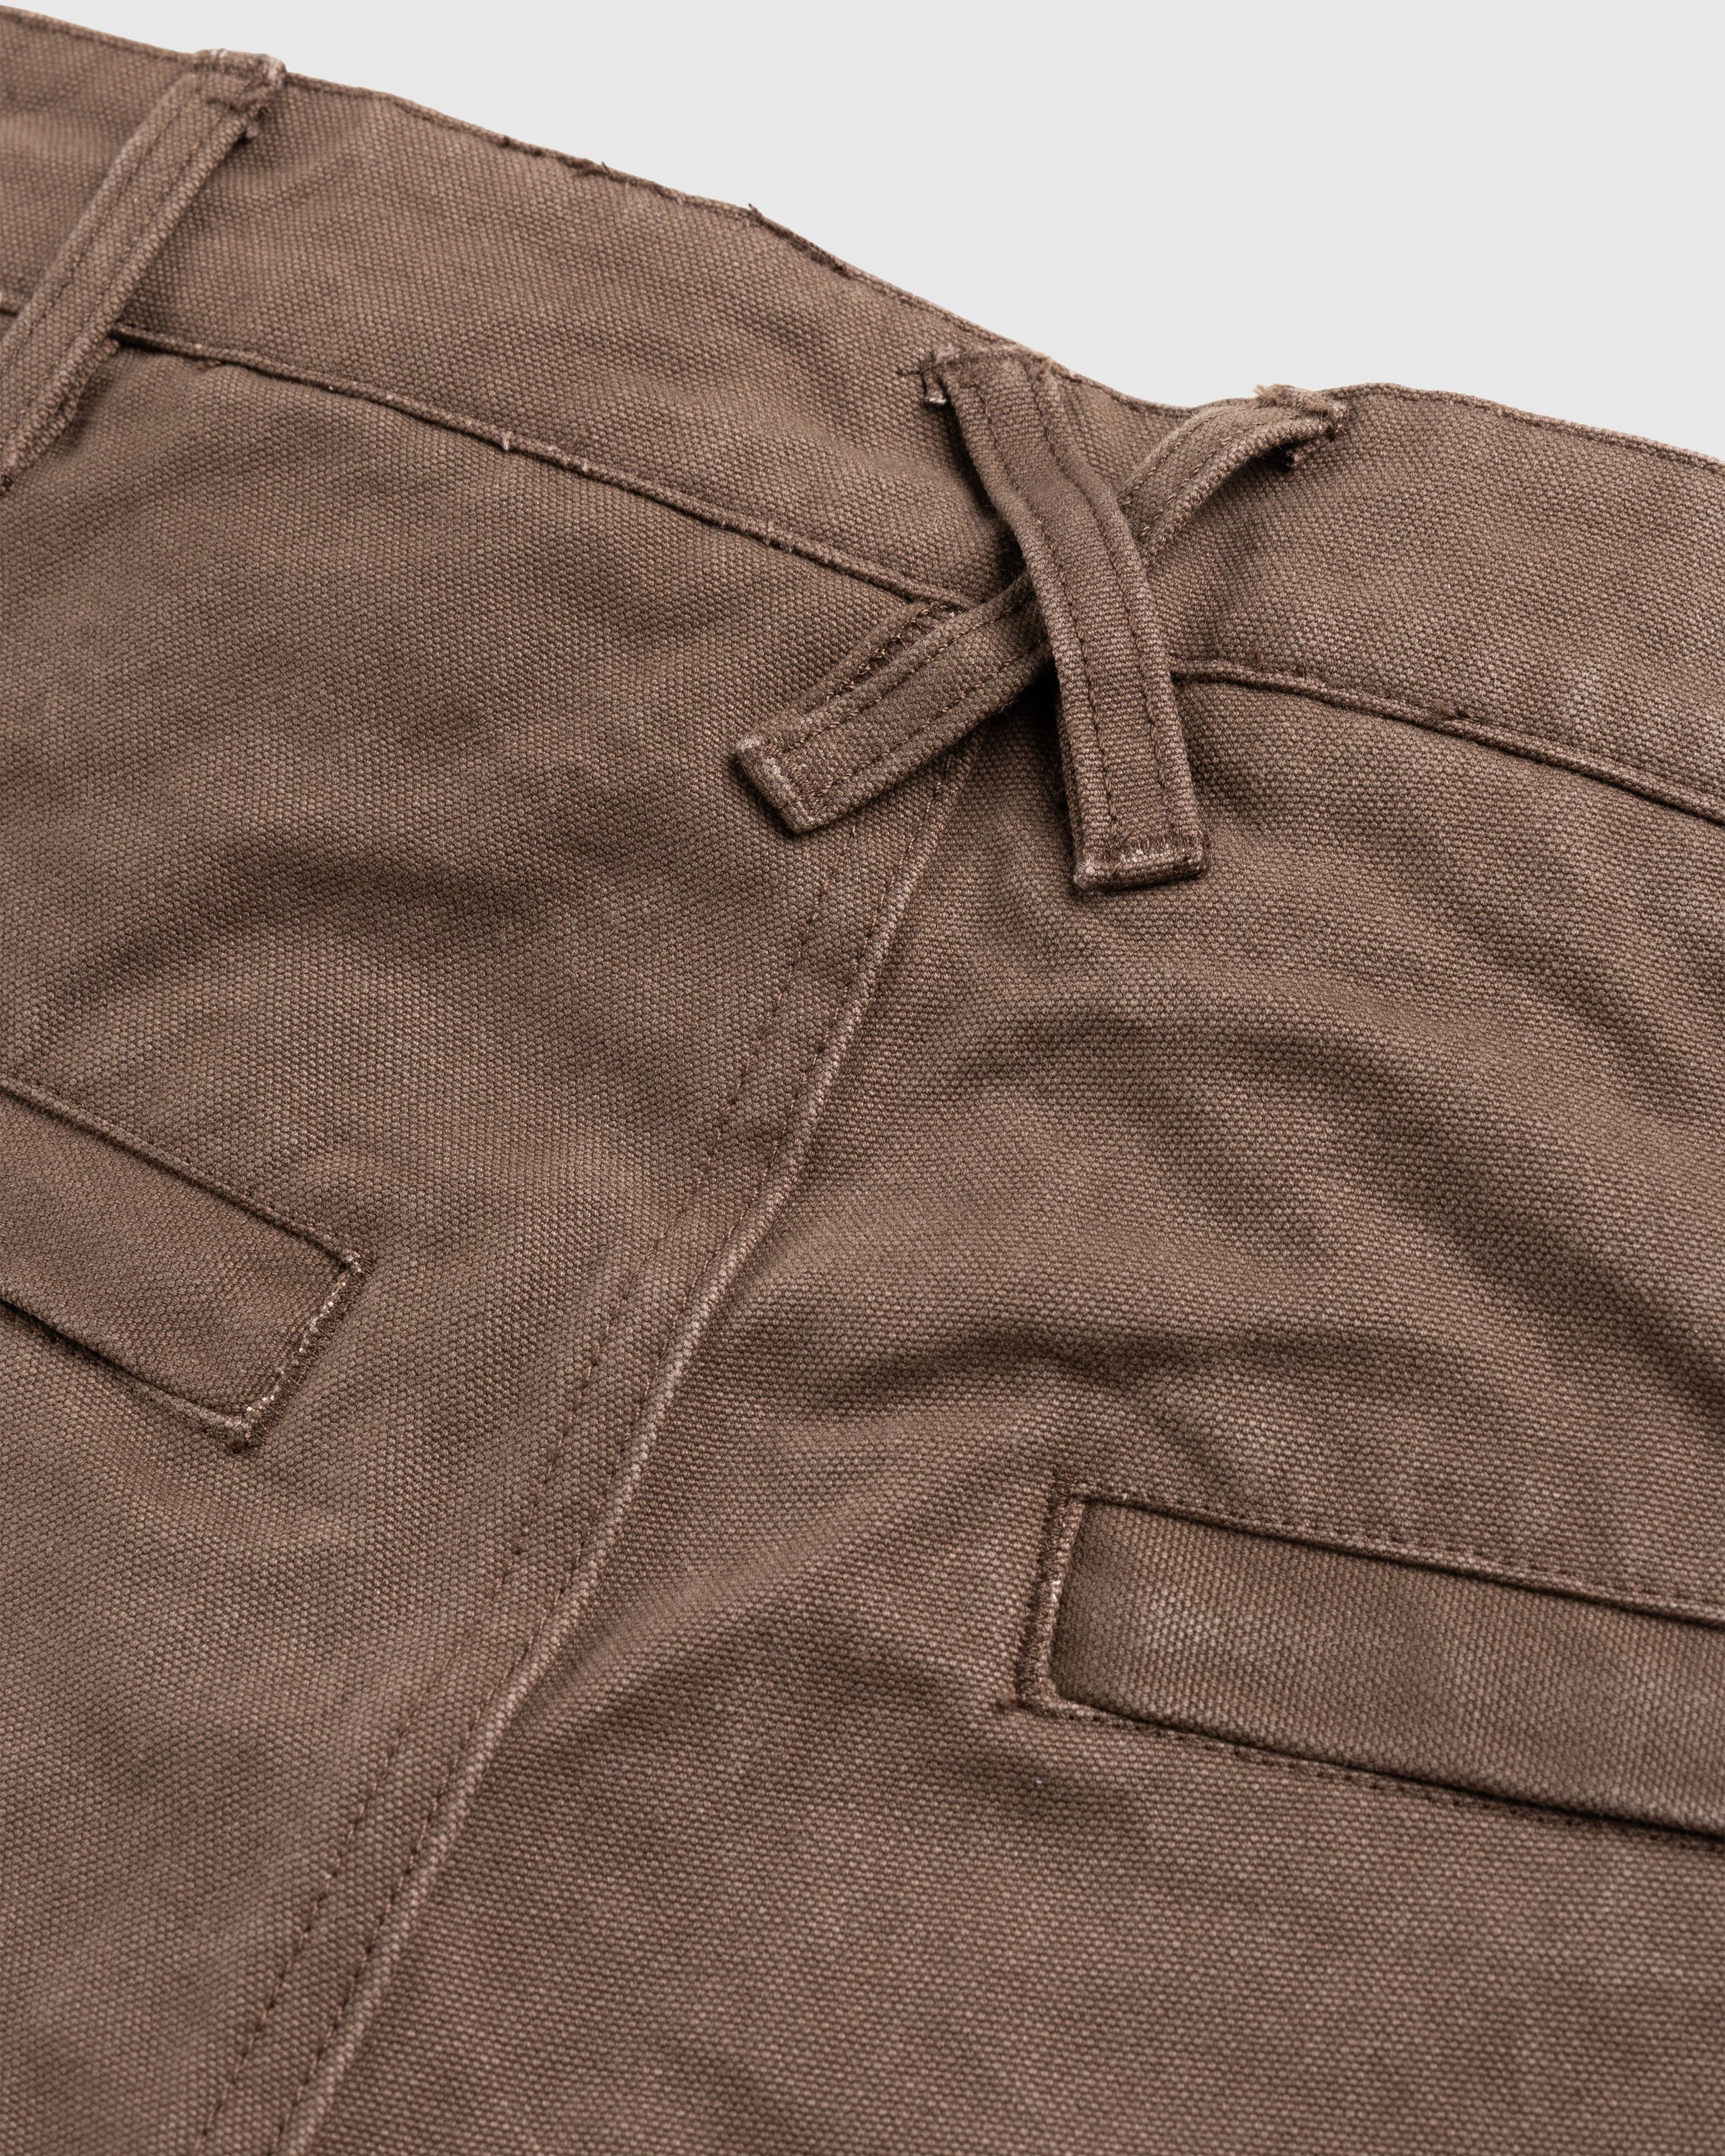 Entire Studios - Hard Cargo Carbon - Clothing - Brown - Image 6